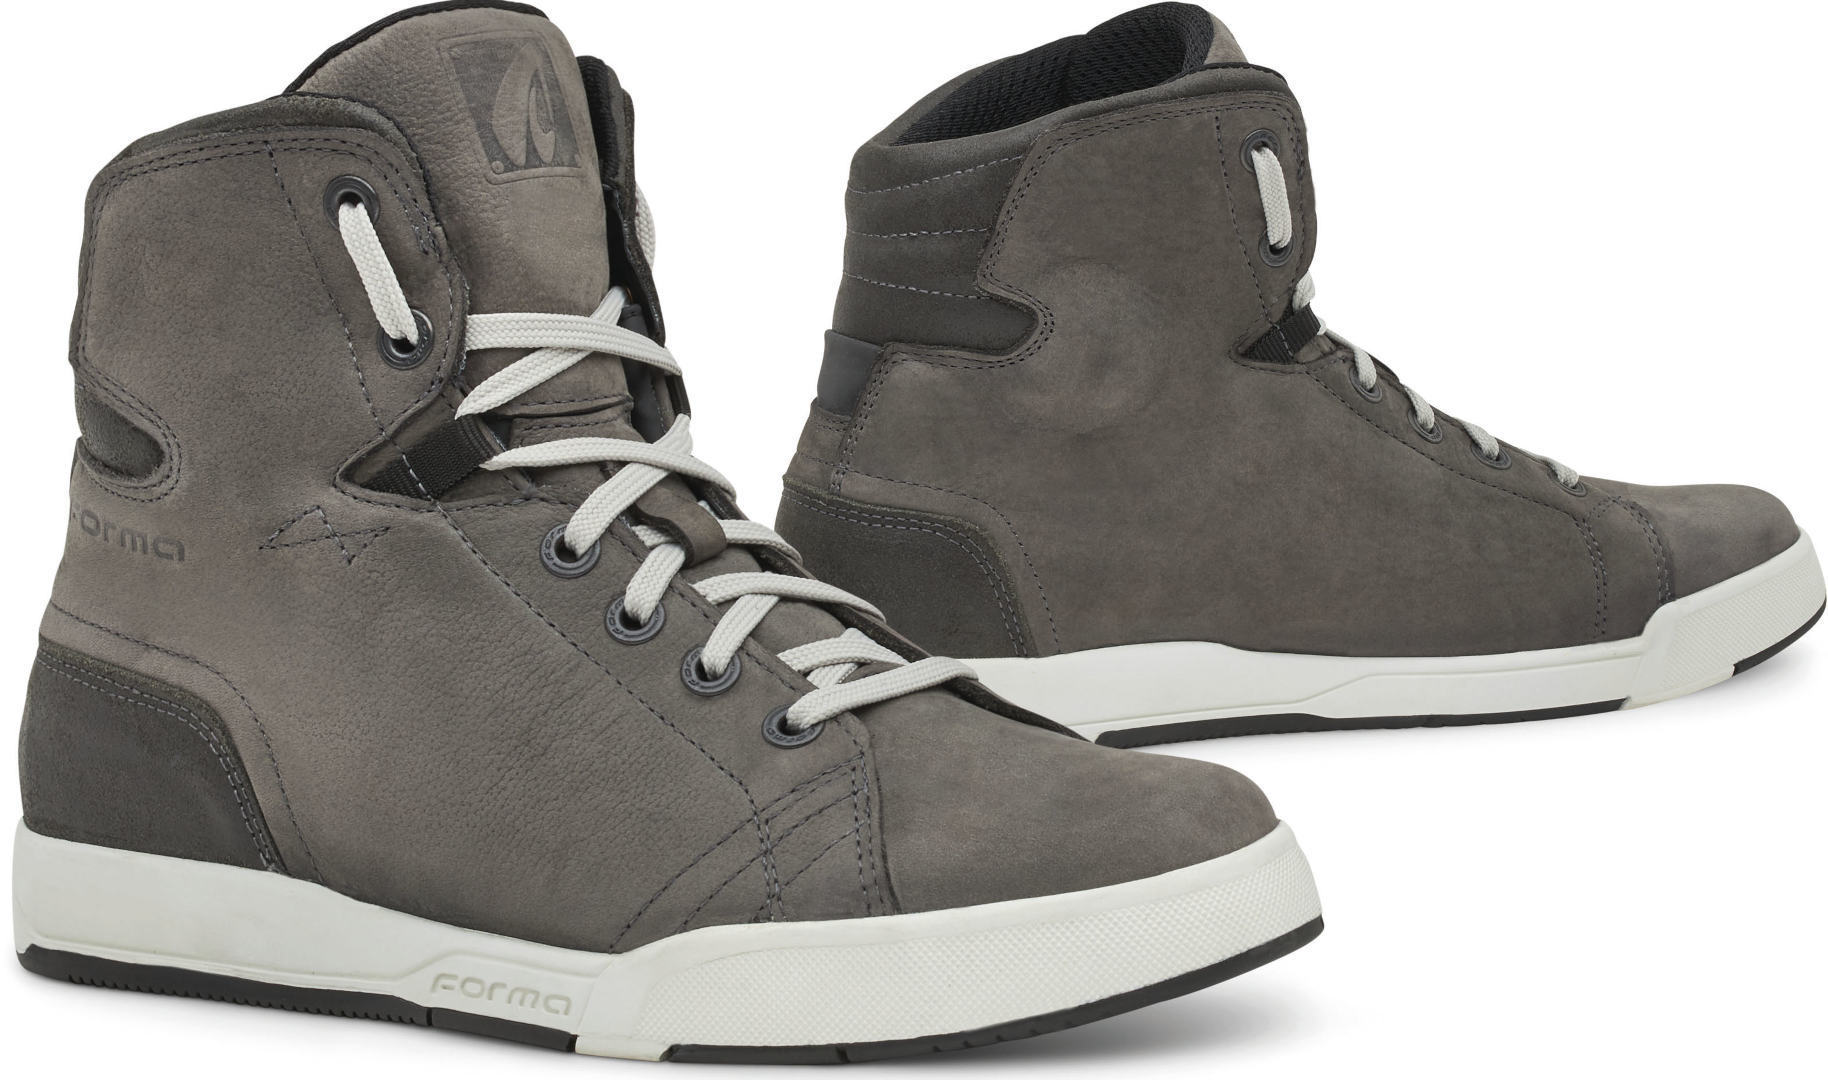 Photos - Motorcycle Boots Forma Swift Dry Motorcycle Shoes Unisex Grey Size: 42 foru17w1542 